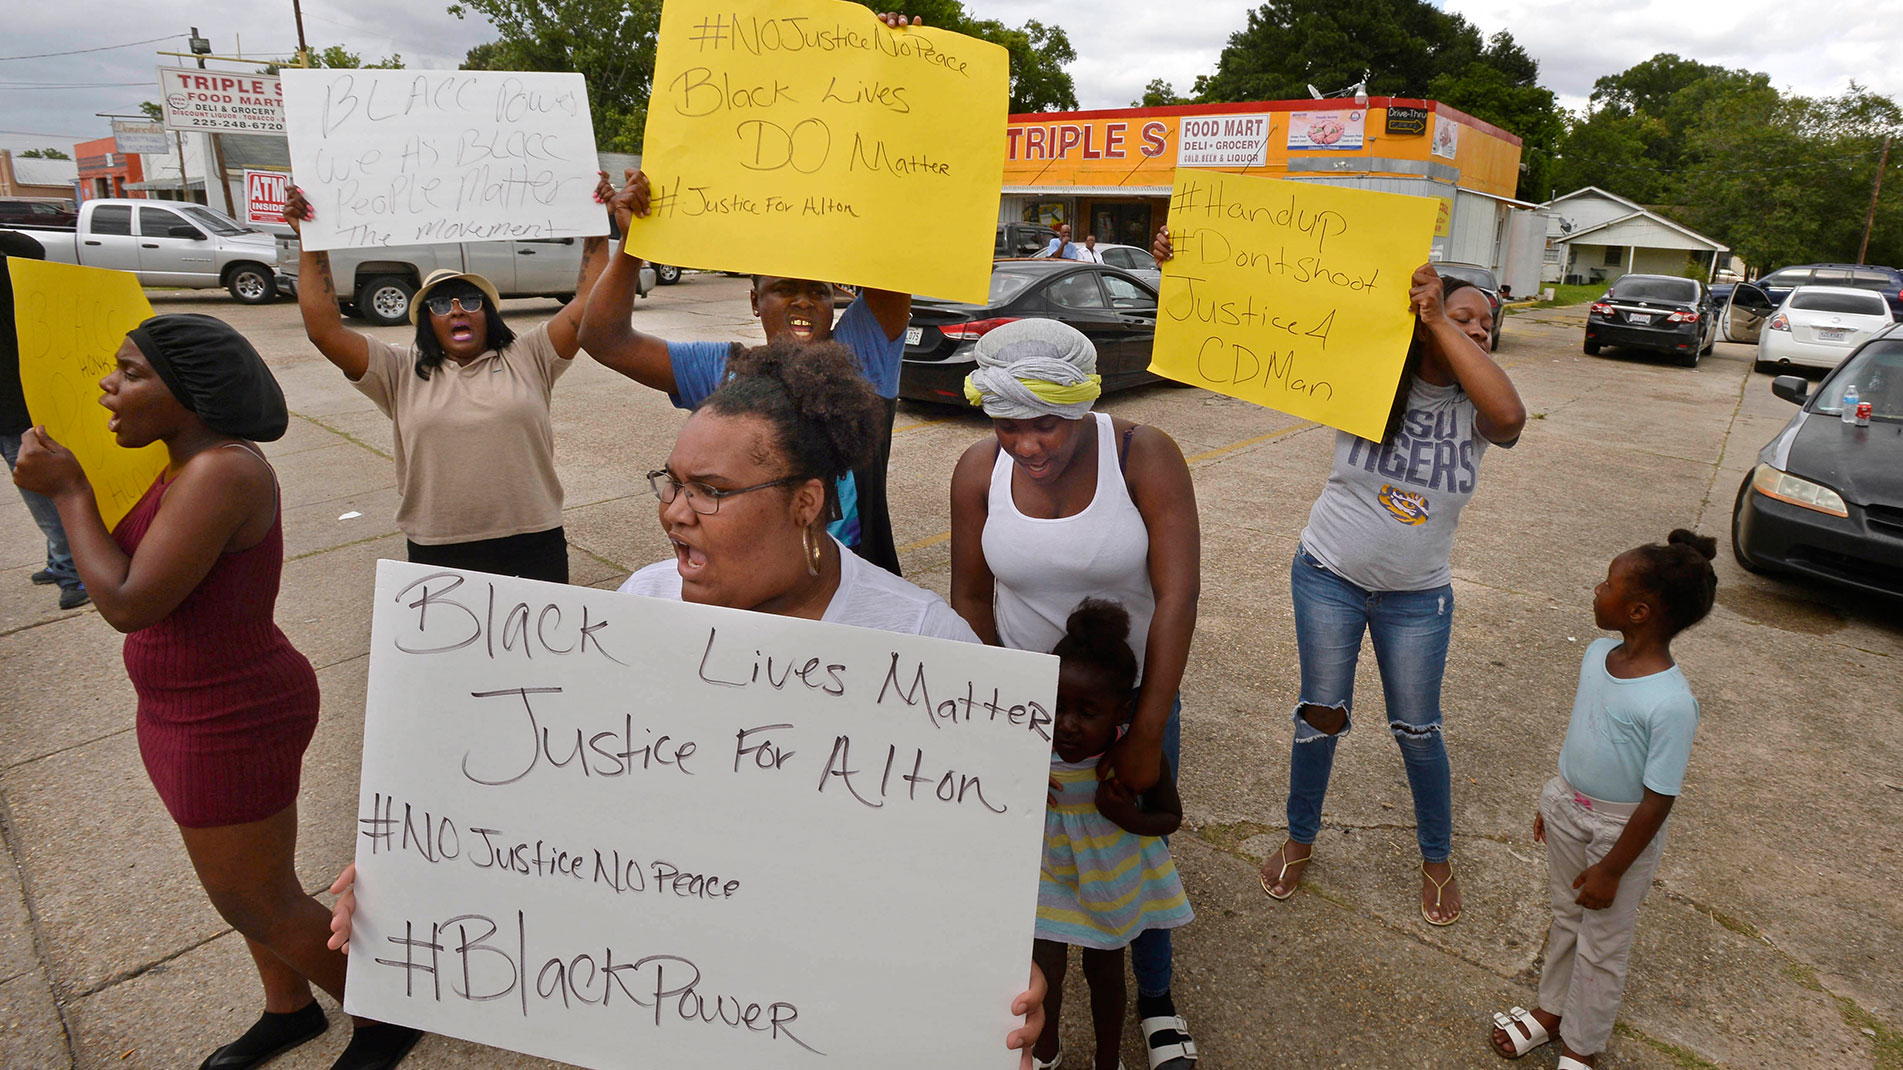 Family and friends of Alton Sterling, including his cousin Jakayla Sterling, foreground, protest on the corner of Fairfields Ave. and North Foster Drive, after Sterling was fatally shot in an altercation with Baton Rouge Police, Tuesday, July 5, 2016. (Travis Spradling/The Advocate via AP)